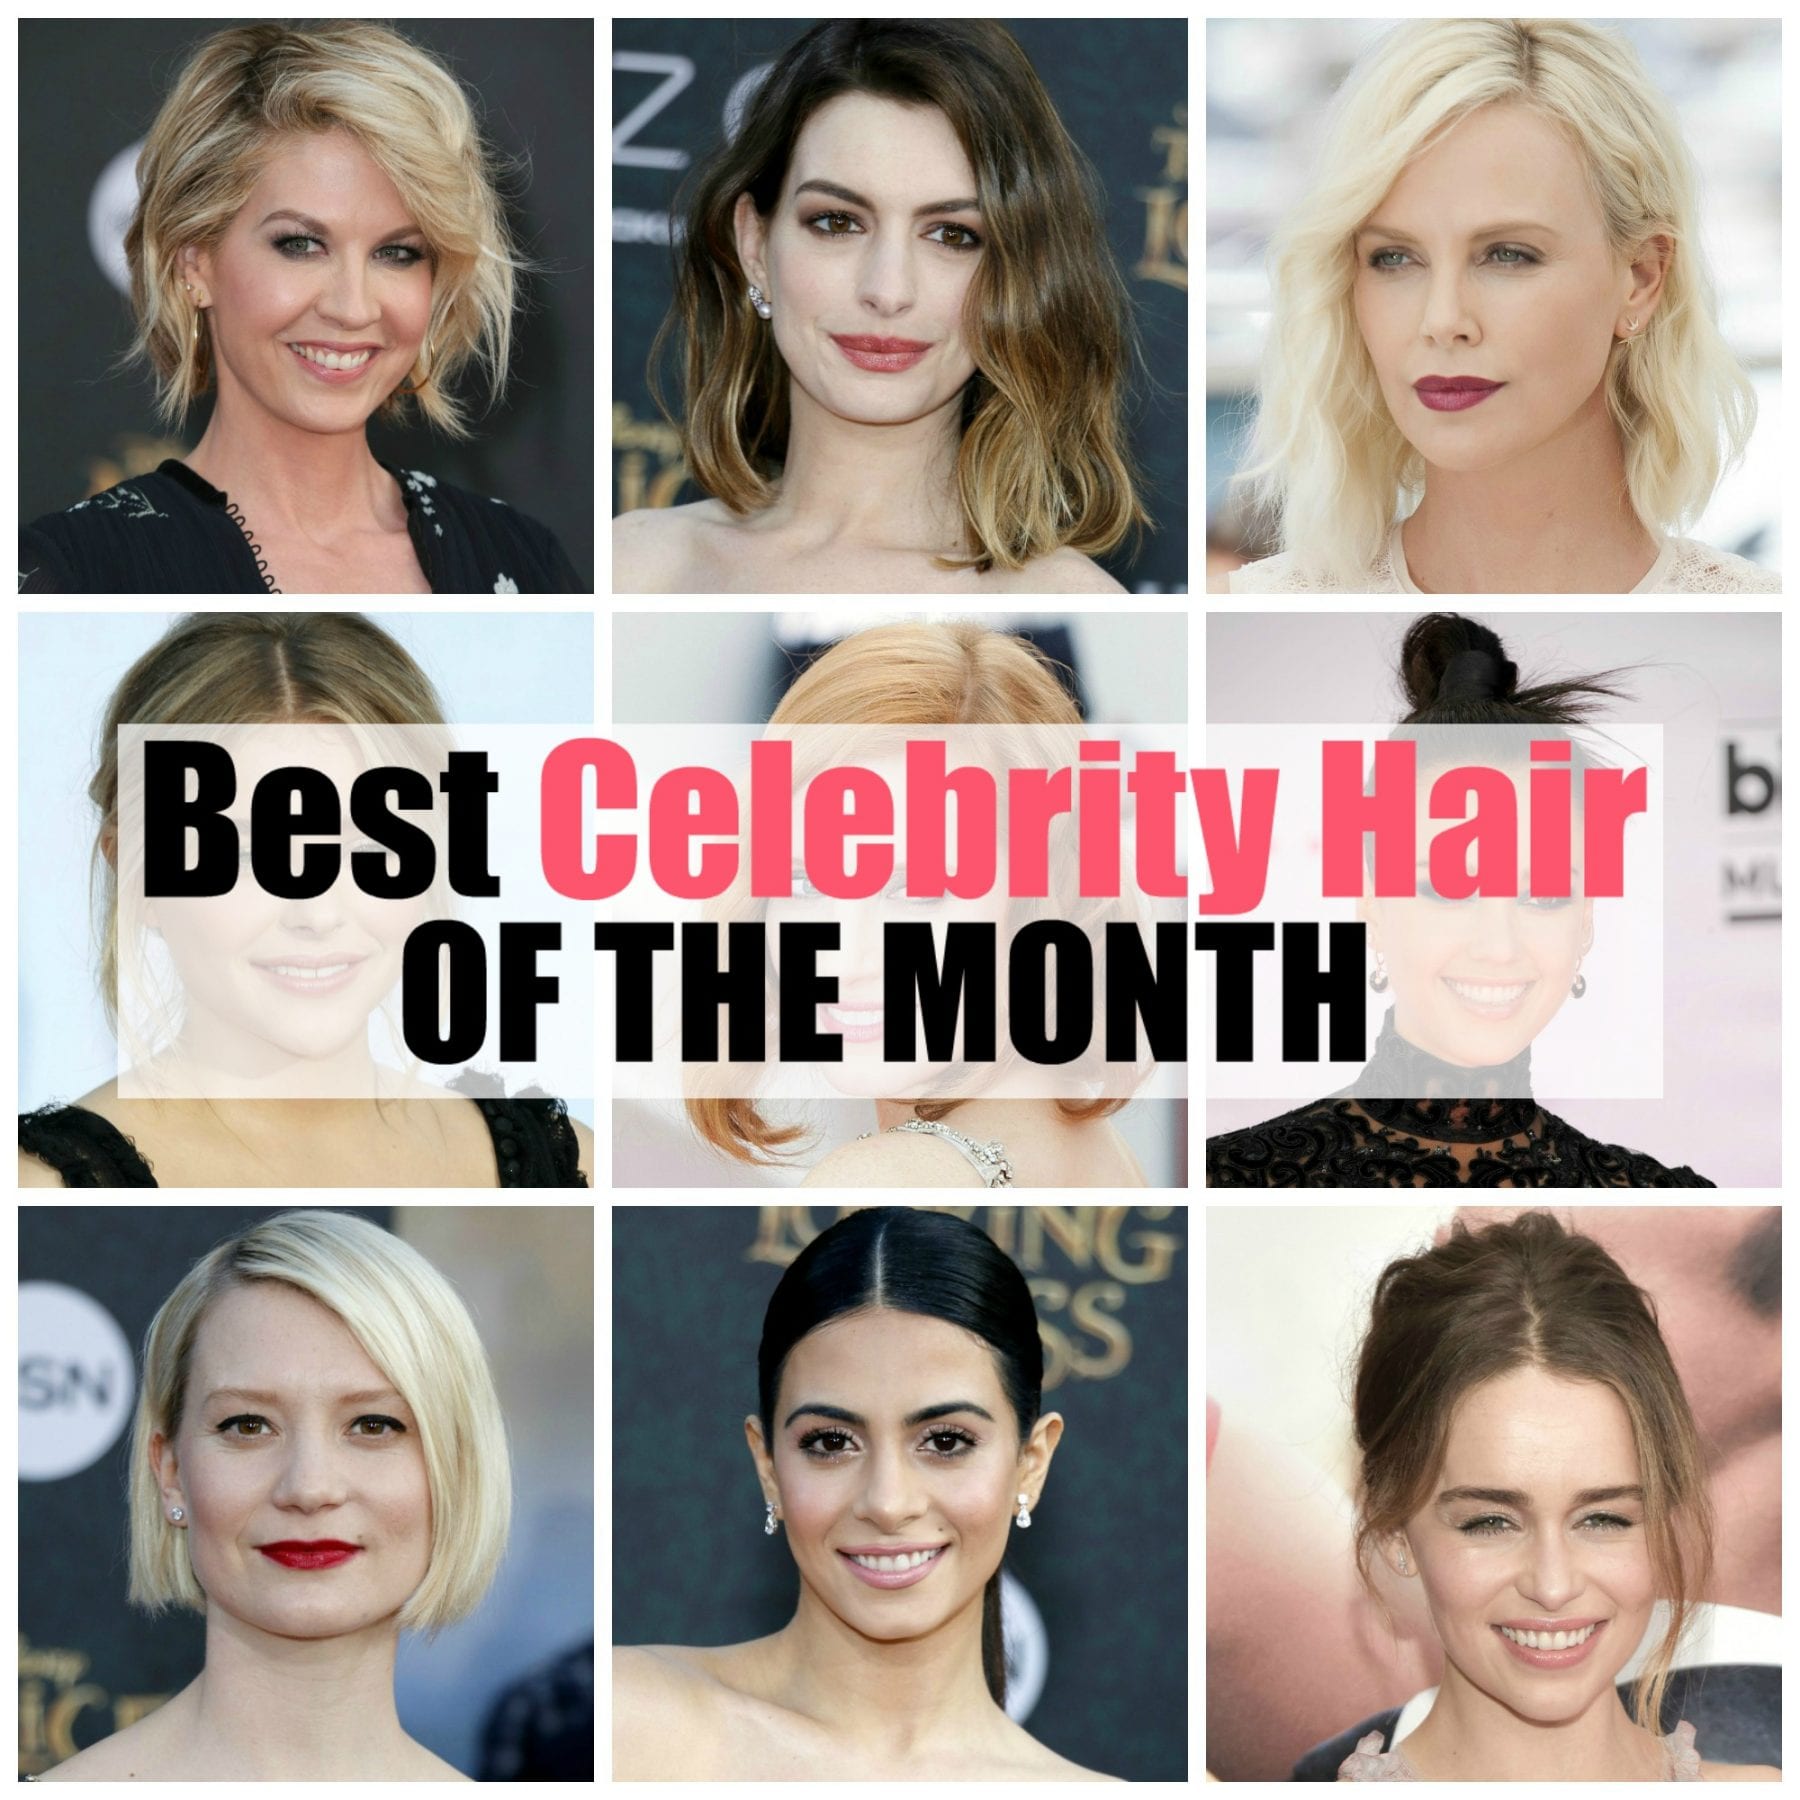 These 15 celebrity hair styles from the past month, will surely give you some inspiration for your next style. Whether you have short, medium or long hair, these cuts, color and styles will guide you (and your stylist) in the right direction with a hairstyle perfect for you. See if you spot any hair trends on the red carpet. I sure saw a lot of bleach blond hair! Click through the see all 15 celebrity hairstyles.